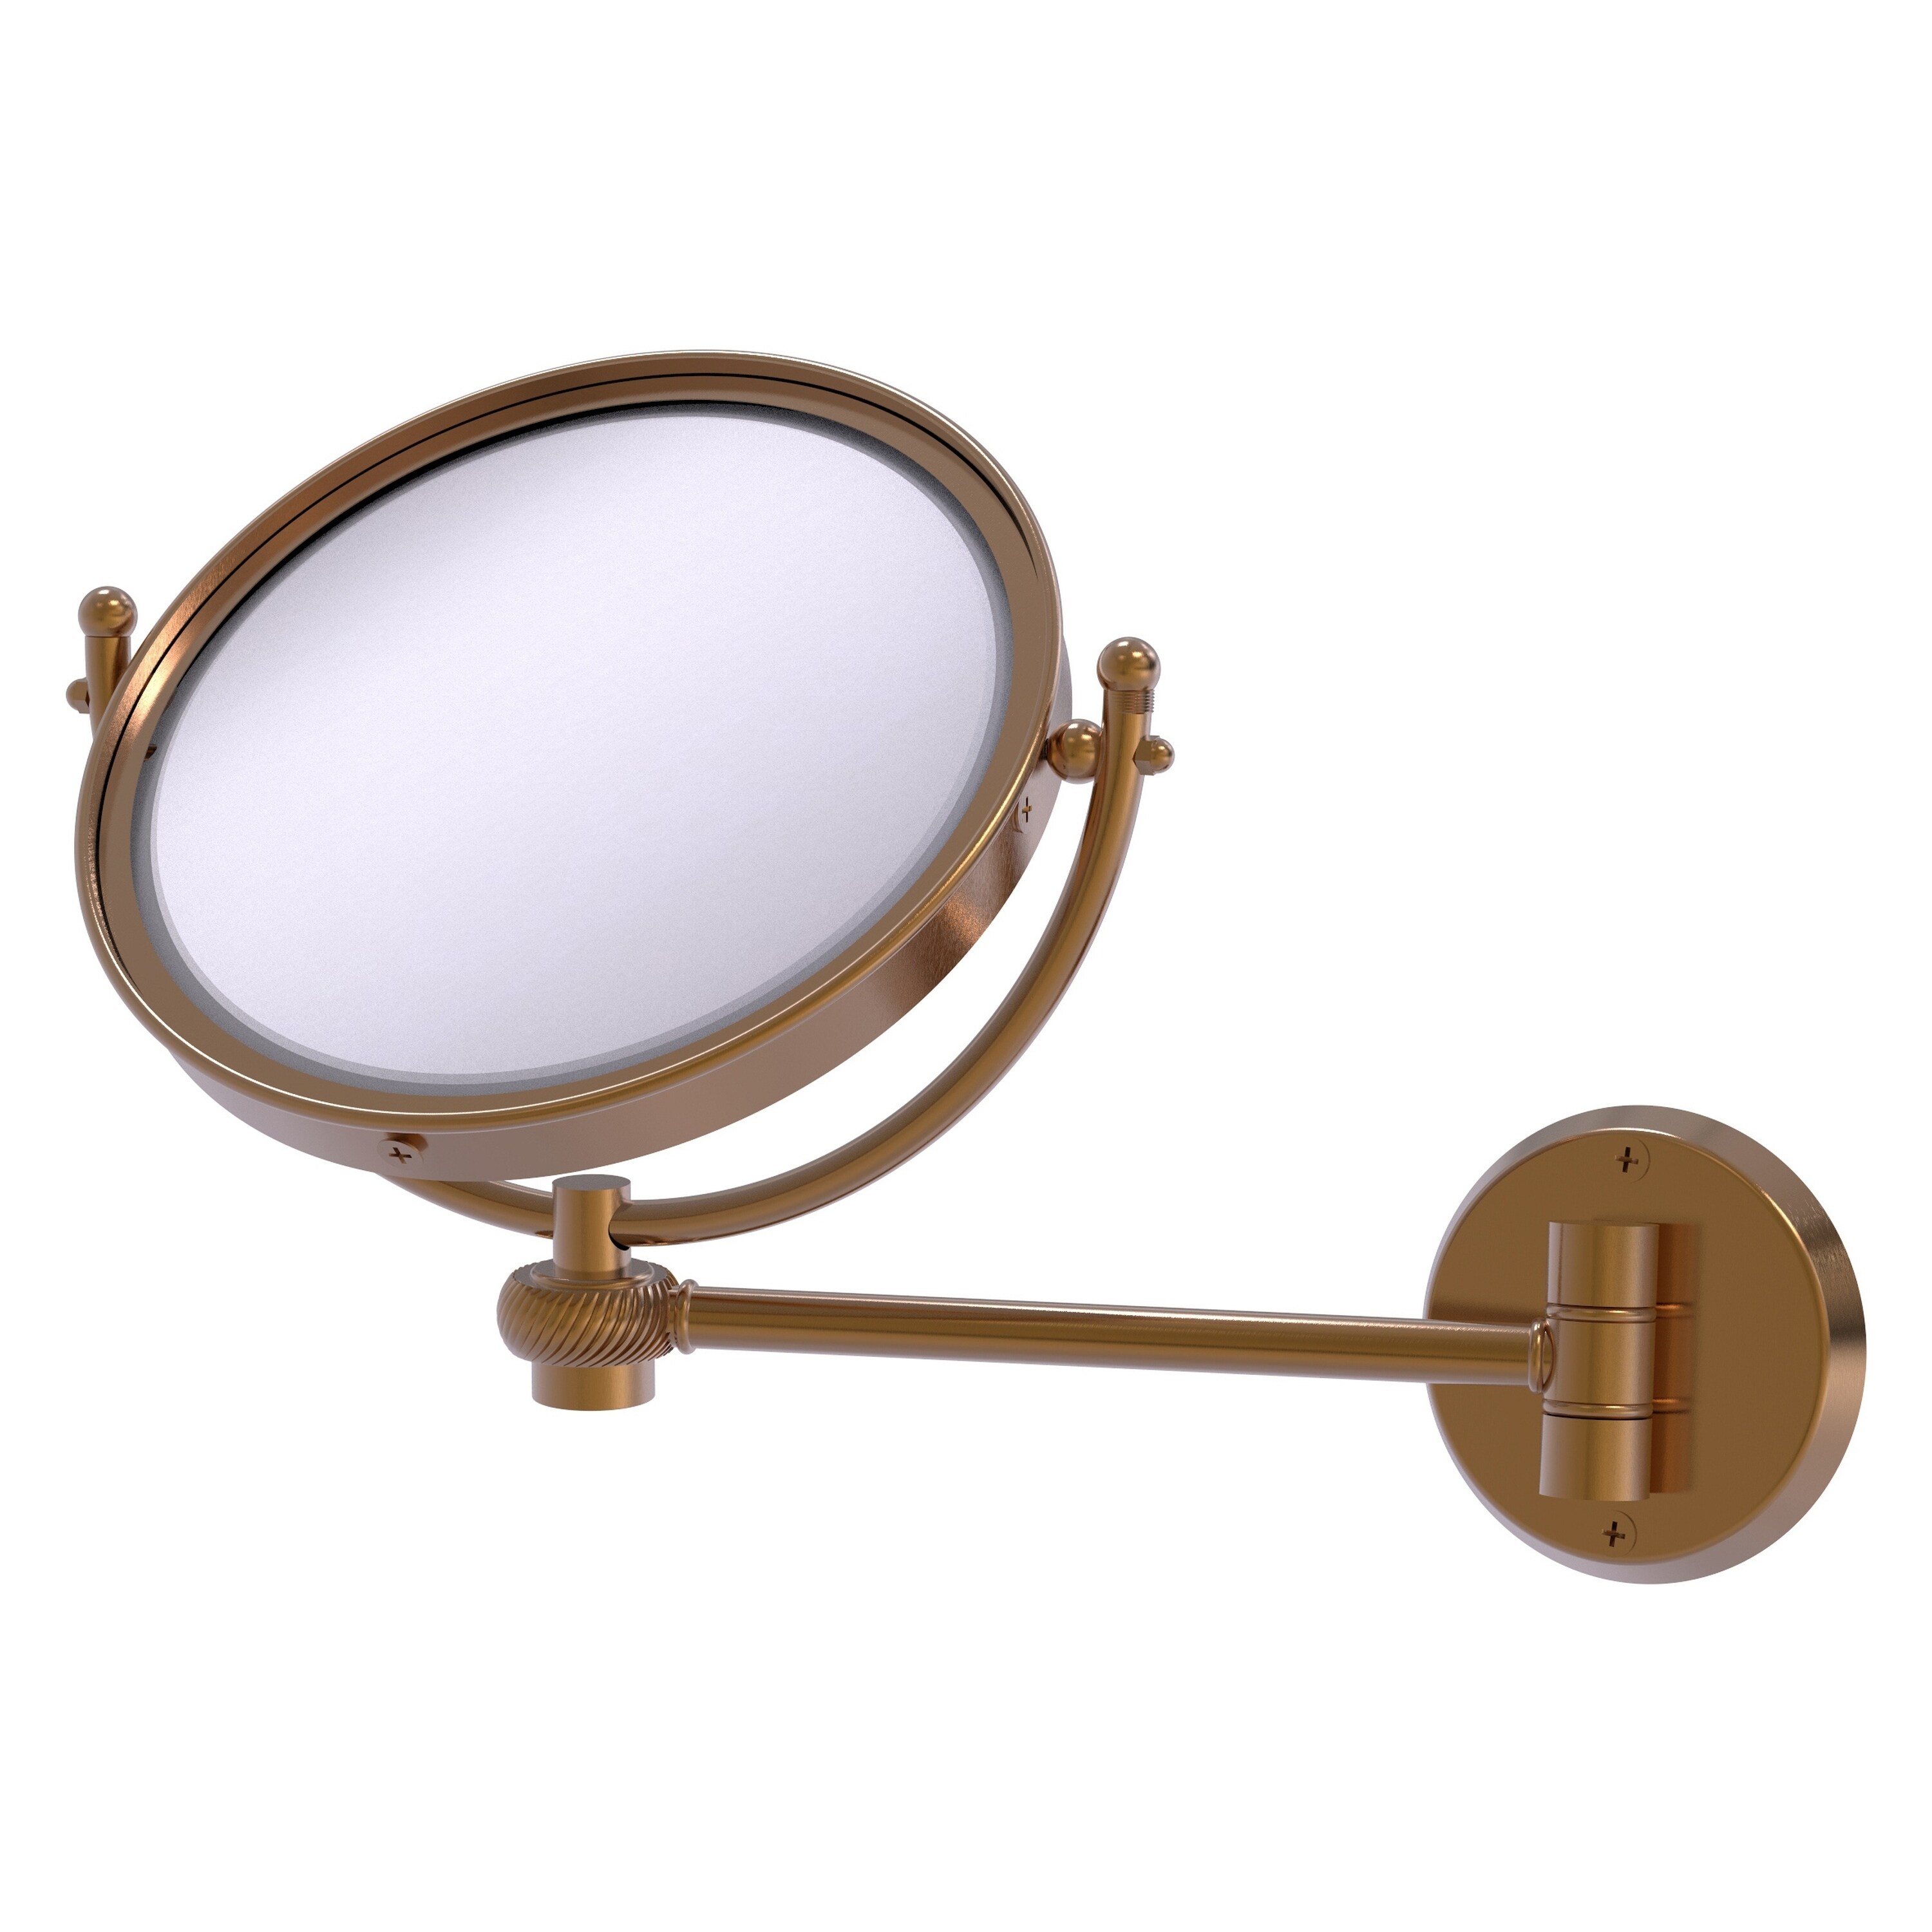 8-in x 10-in Brushed Copper Double-sided 5X Magnifying Wall-mounted Vanity Mirror | - Allied Brass WM-5T/5X-BBR